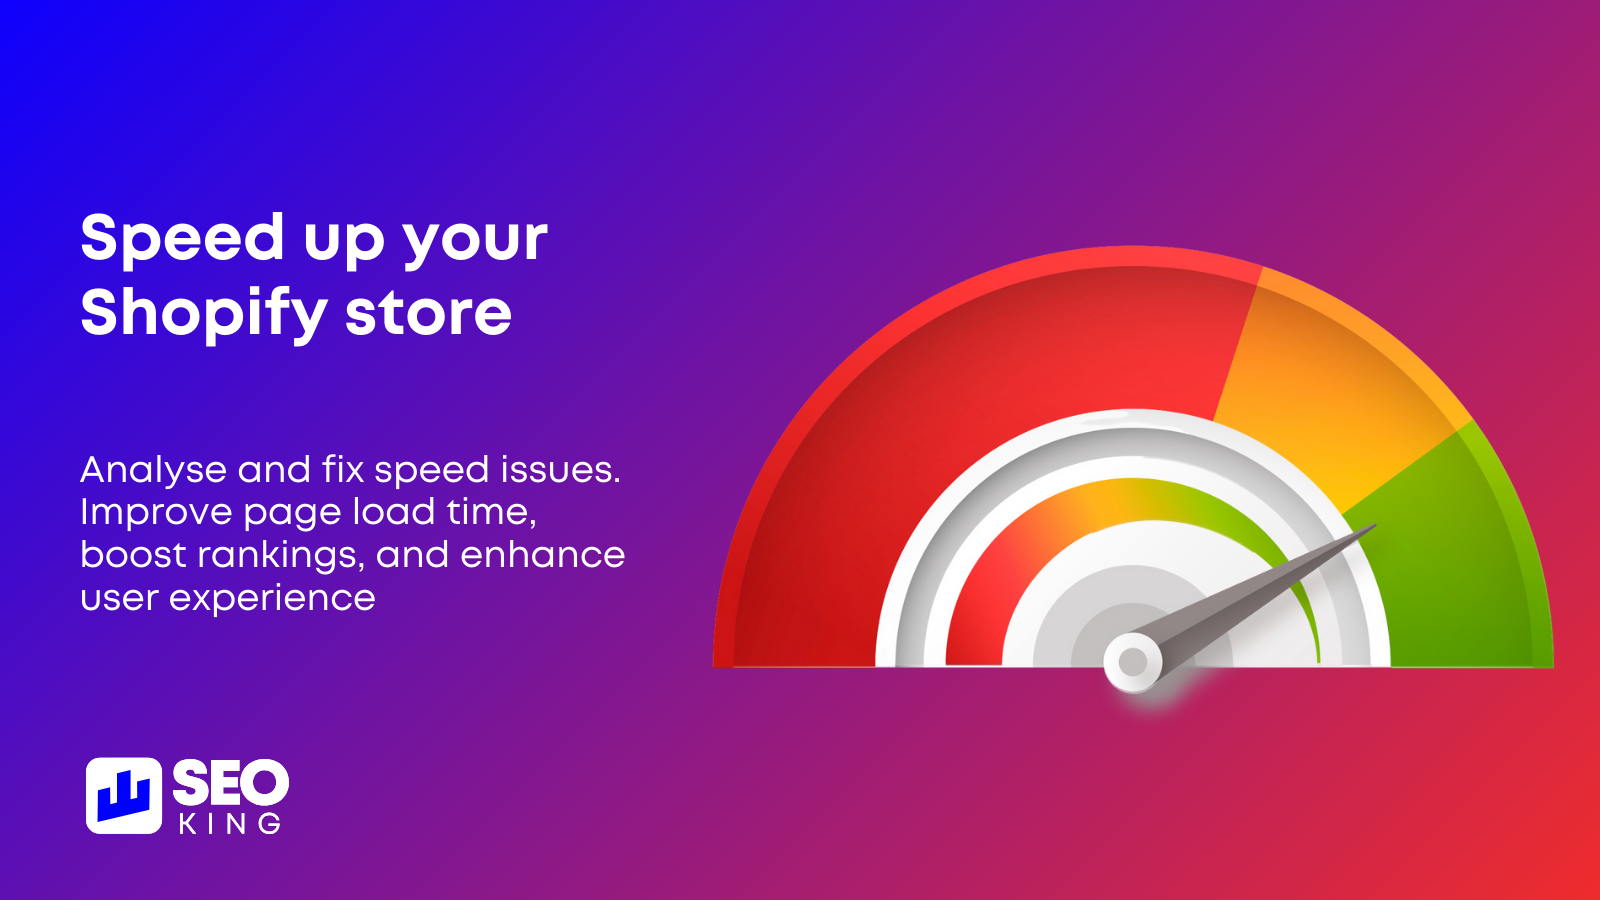 Speed up your Shopify store